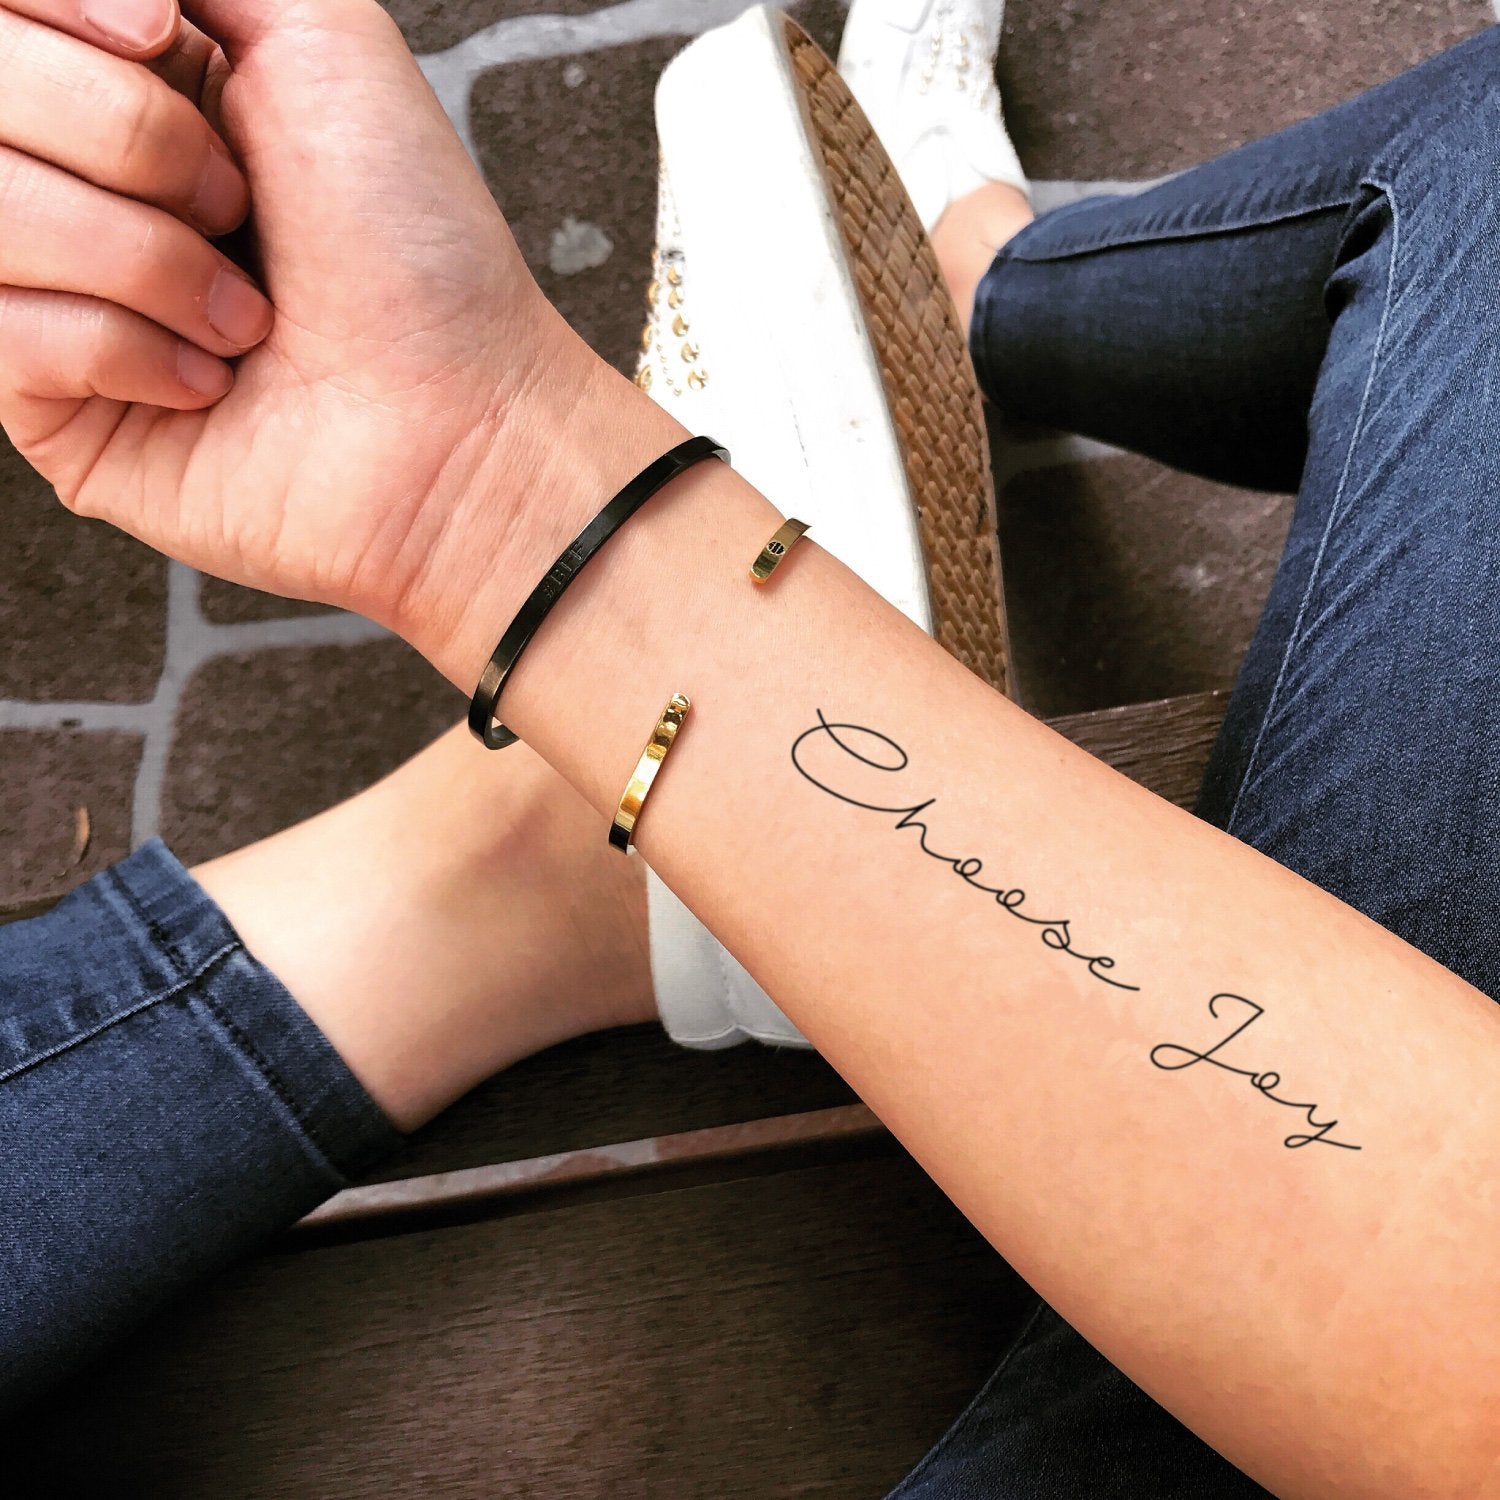 70 Small Tattoos with Big Meanings Youll Fall in Love with  Saved Tattoo